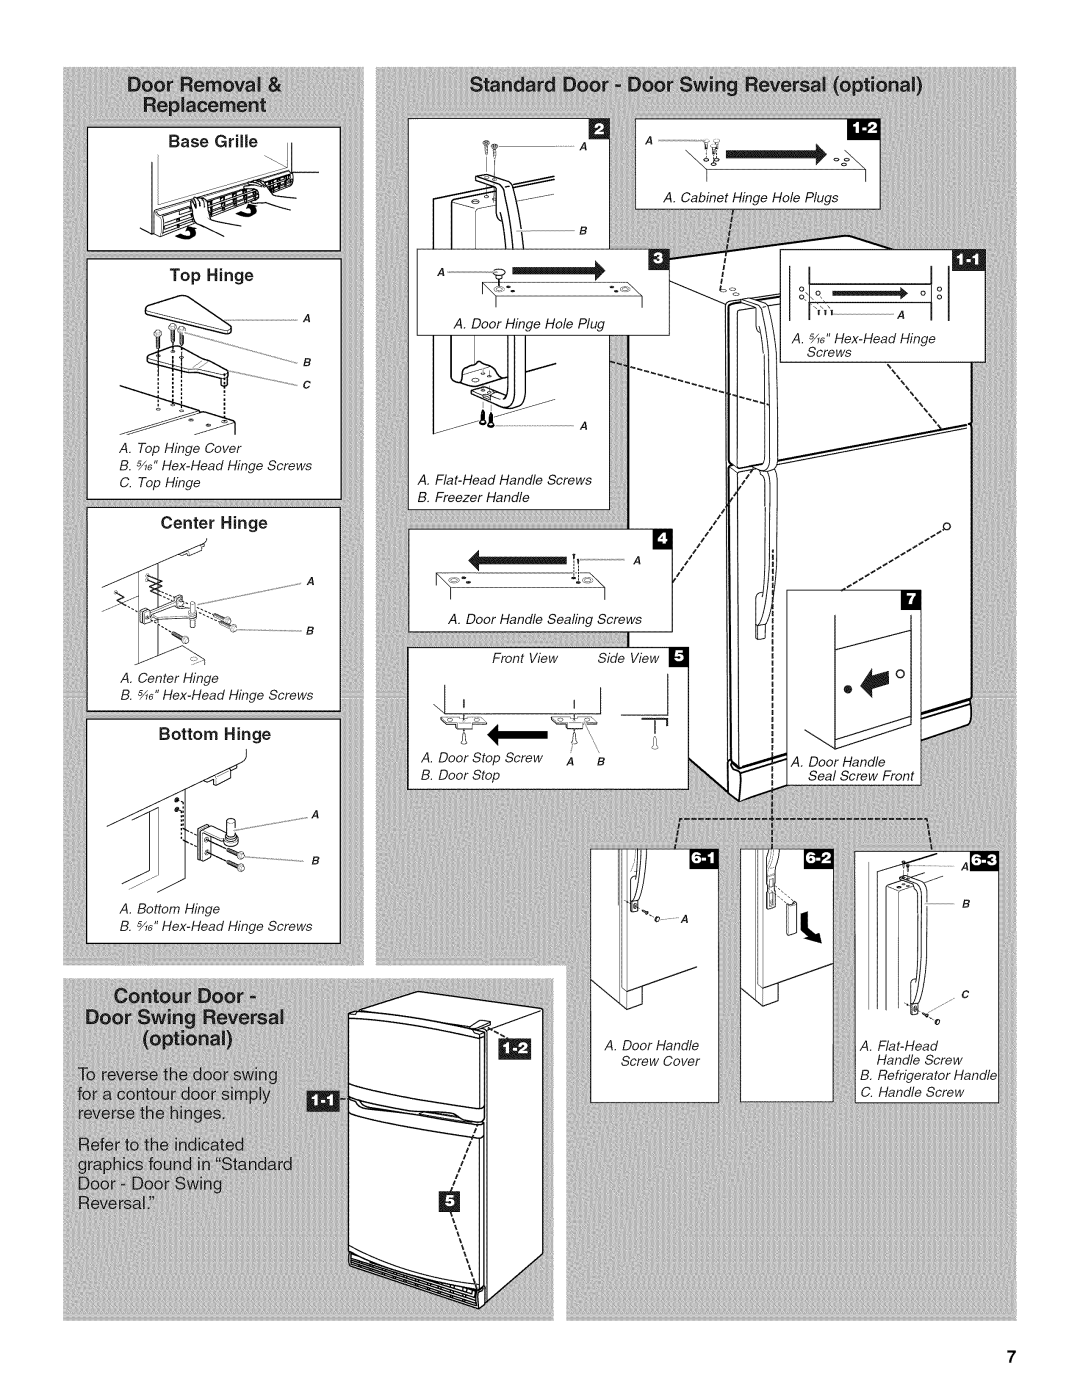 Whirlpool W10131412A installation instructions oo,t,o,olo, Top Hinge, A. Door Handle Sealing Screws 